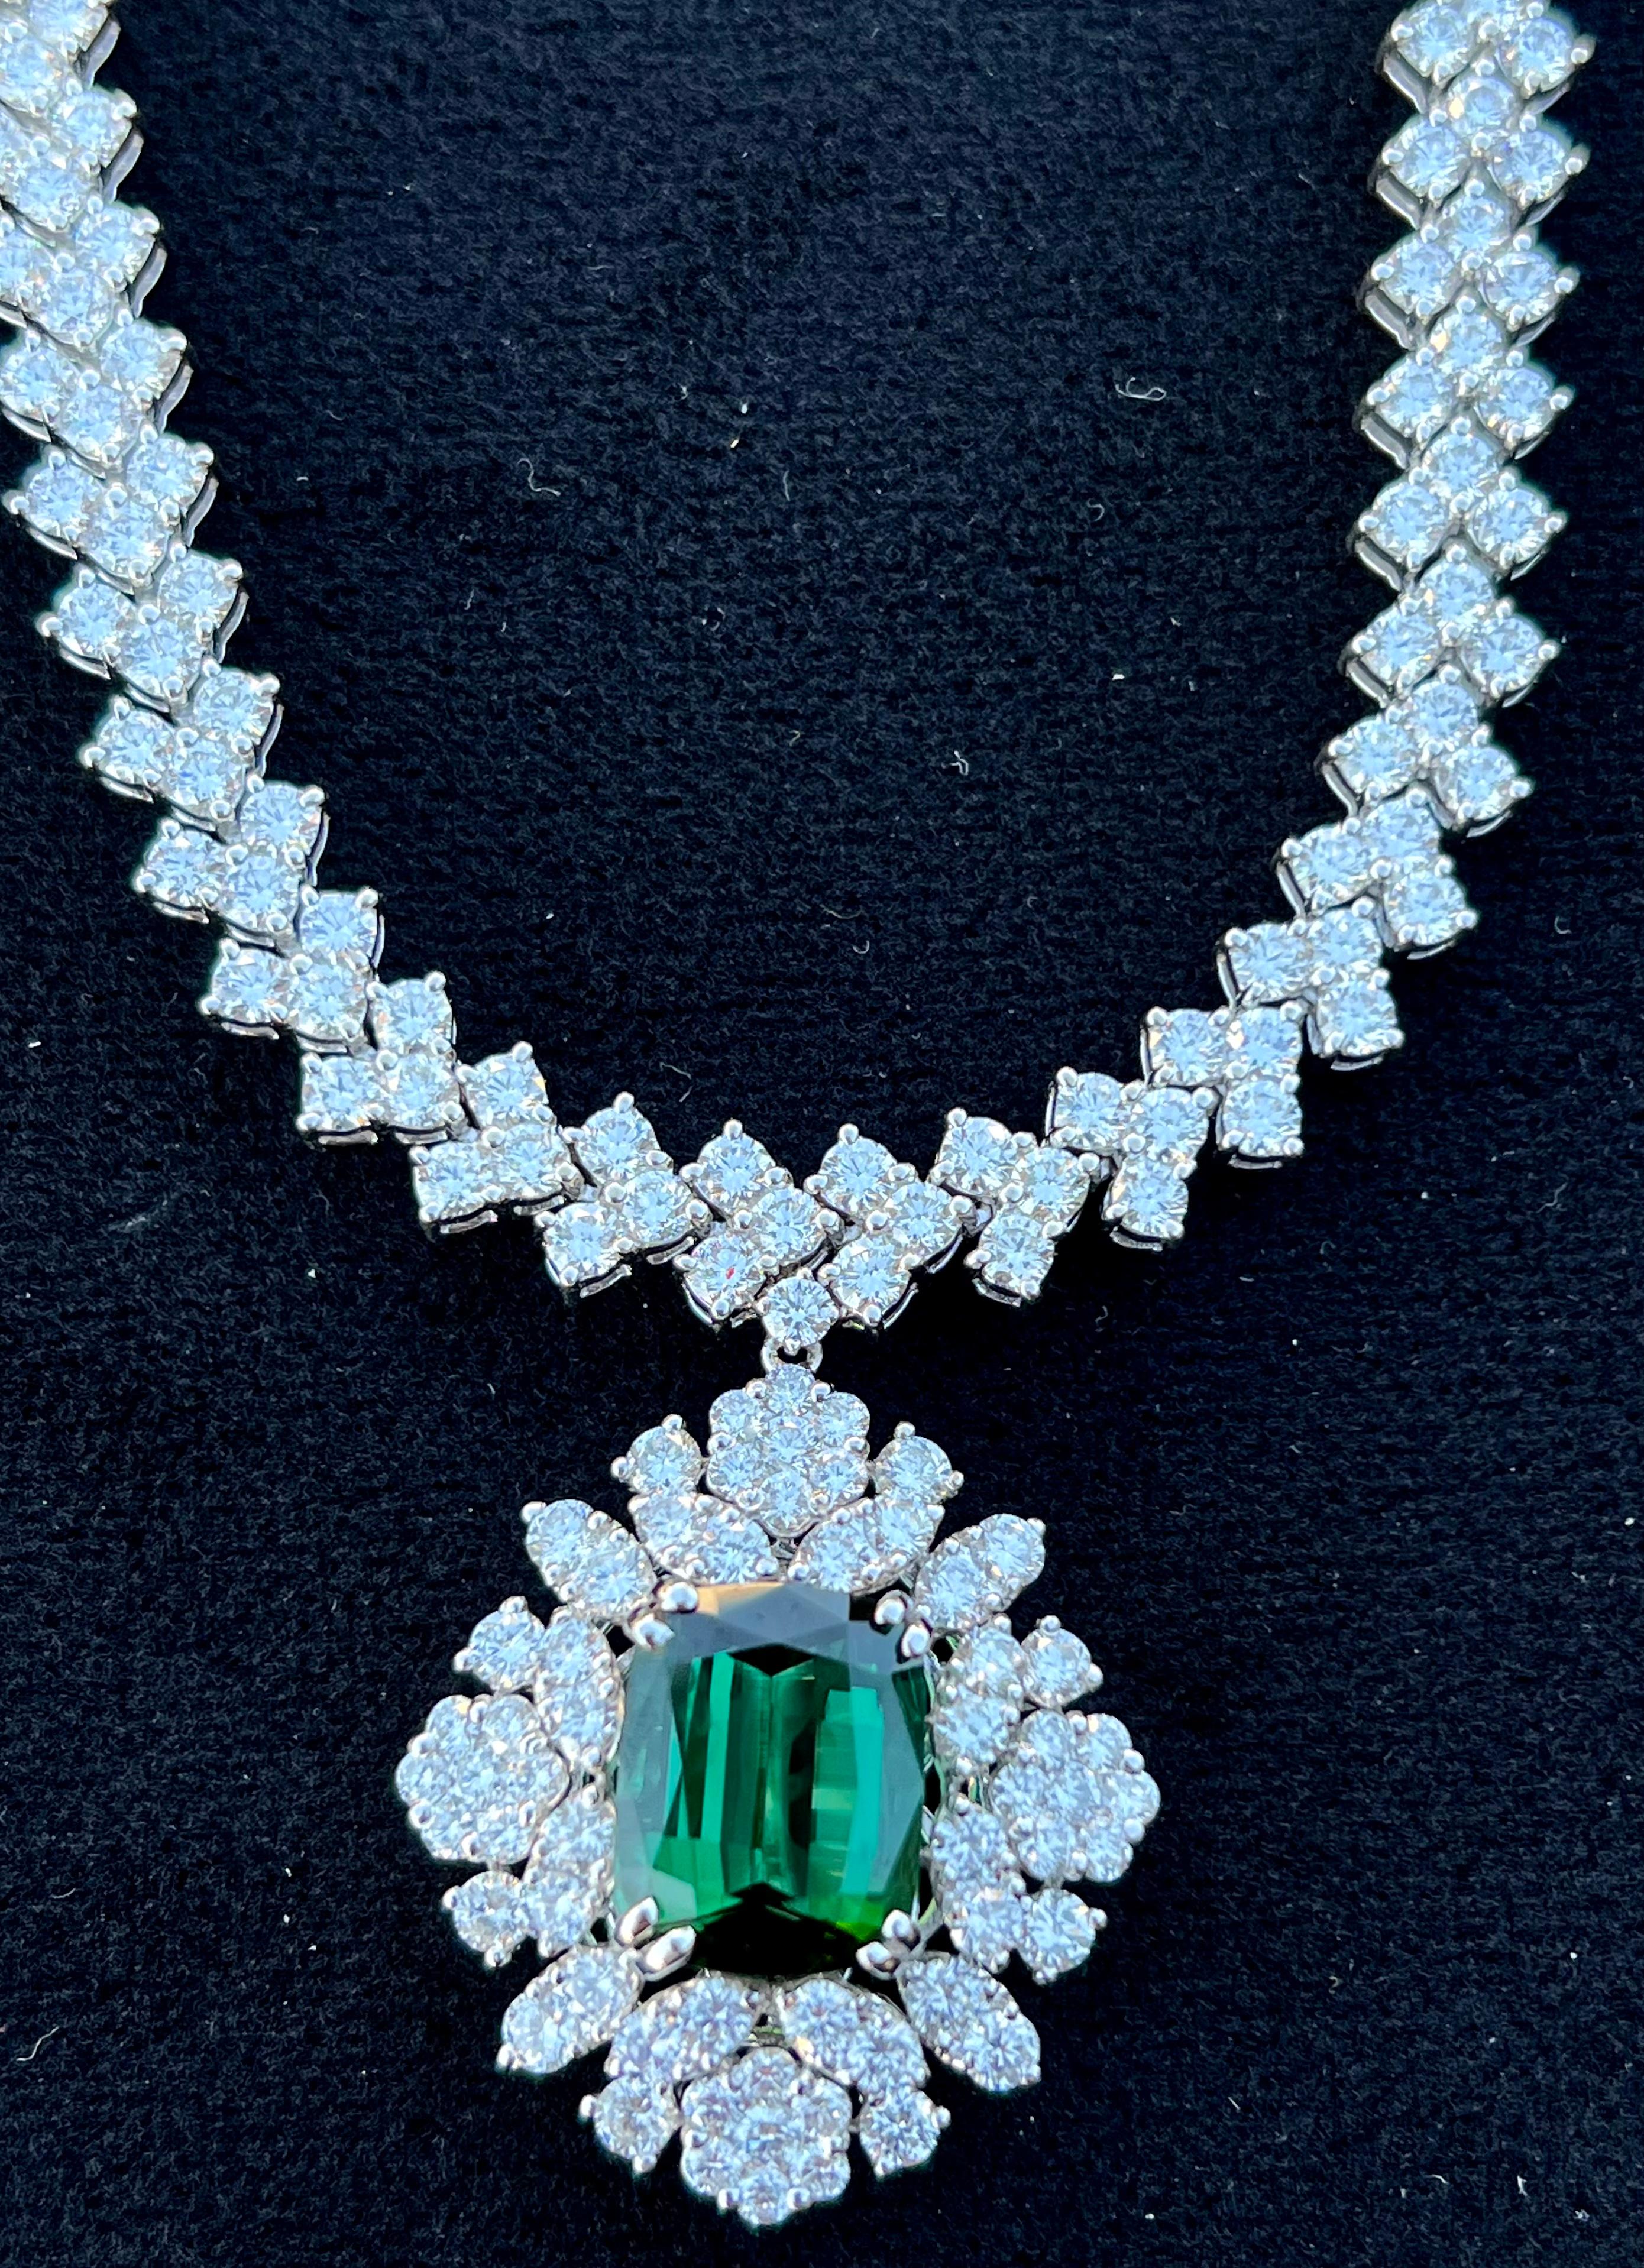 Very elegant, ladies estate 18 karat white gold, custom made 39.42 carat total weight pendant necklace features a rich 5.64 carat emerald cut natural green tourmaline in the center, flanked with an array of sparkling white diamonds in a diamond